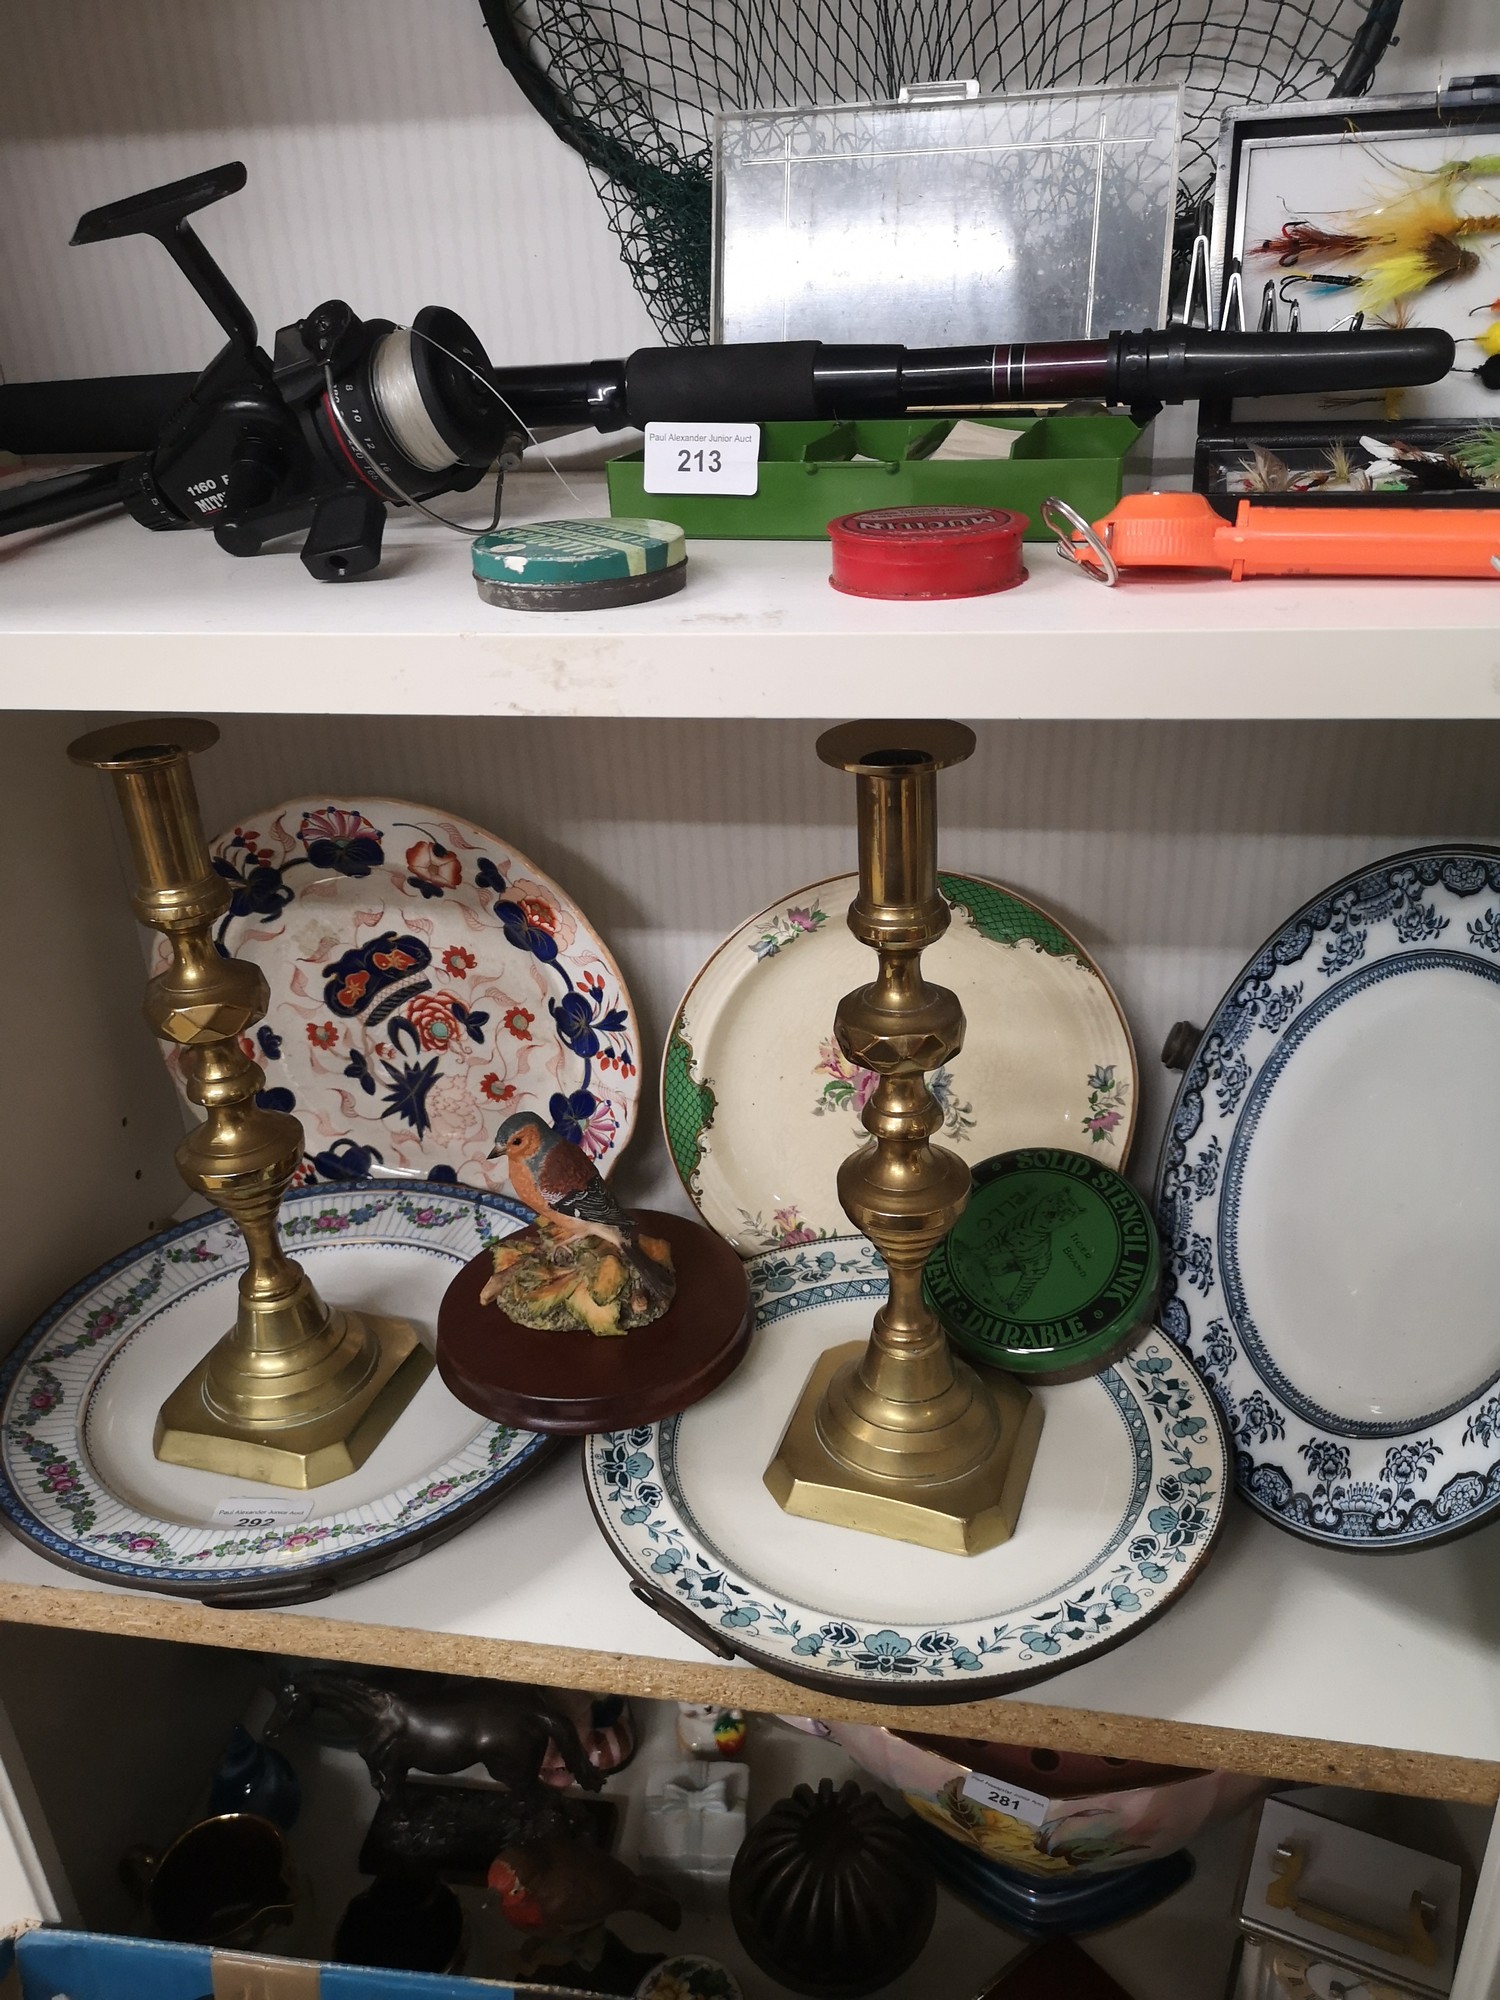 Shelf of collectables includes victorian draining bowls.